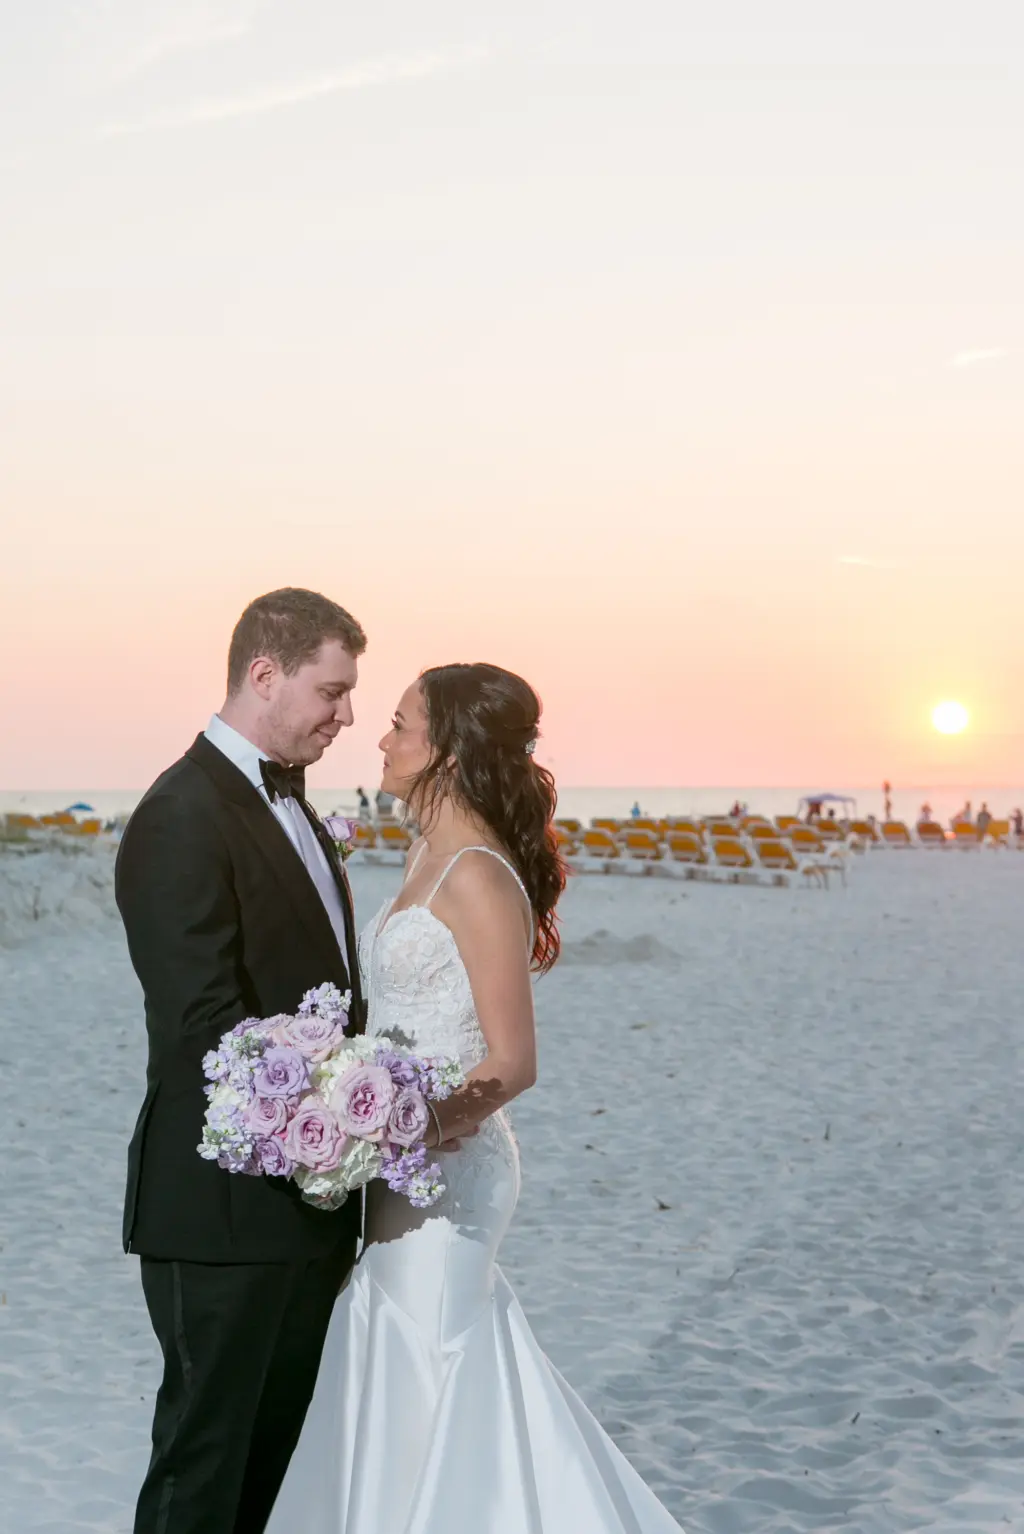 Bride and Groom Sunset Beach Wedding Portrait | Clearwater Photographer Carrie Wildes Photography